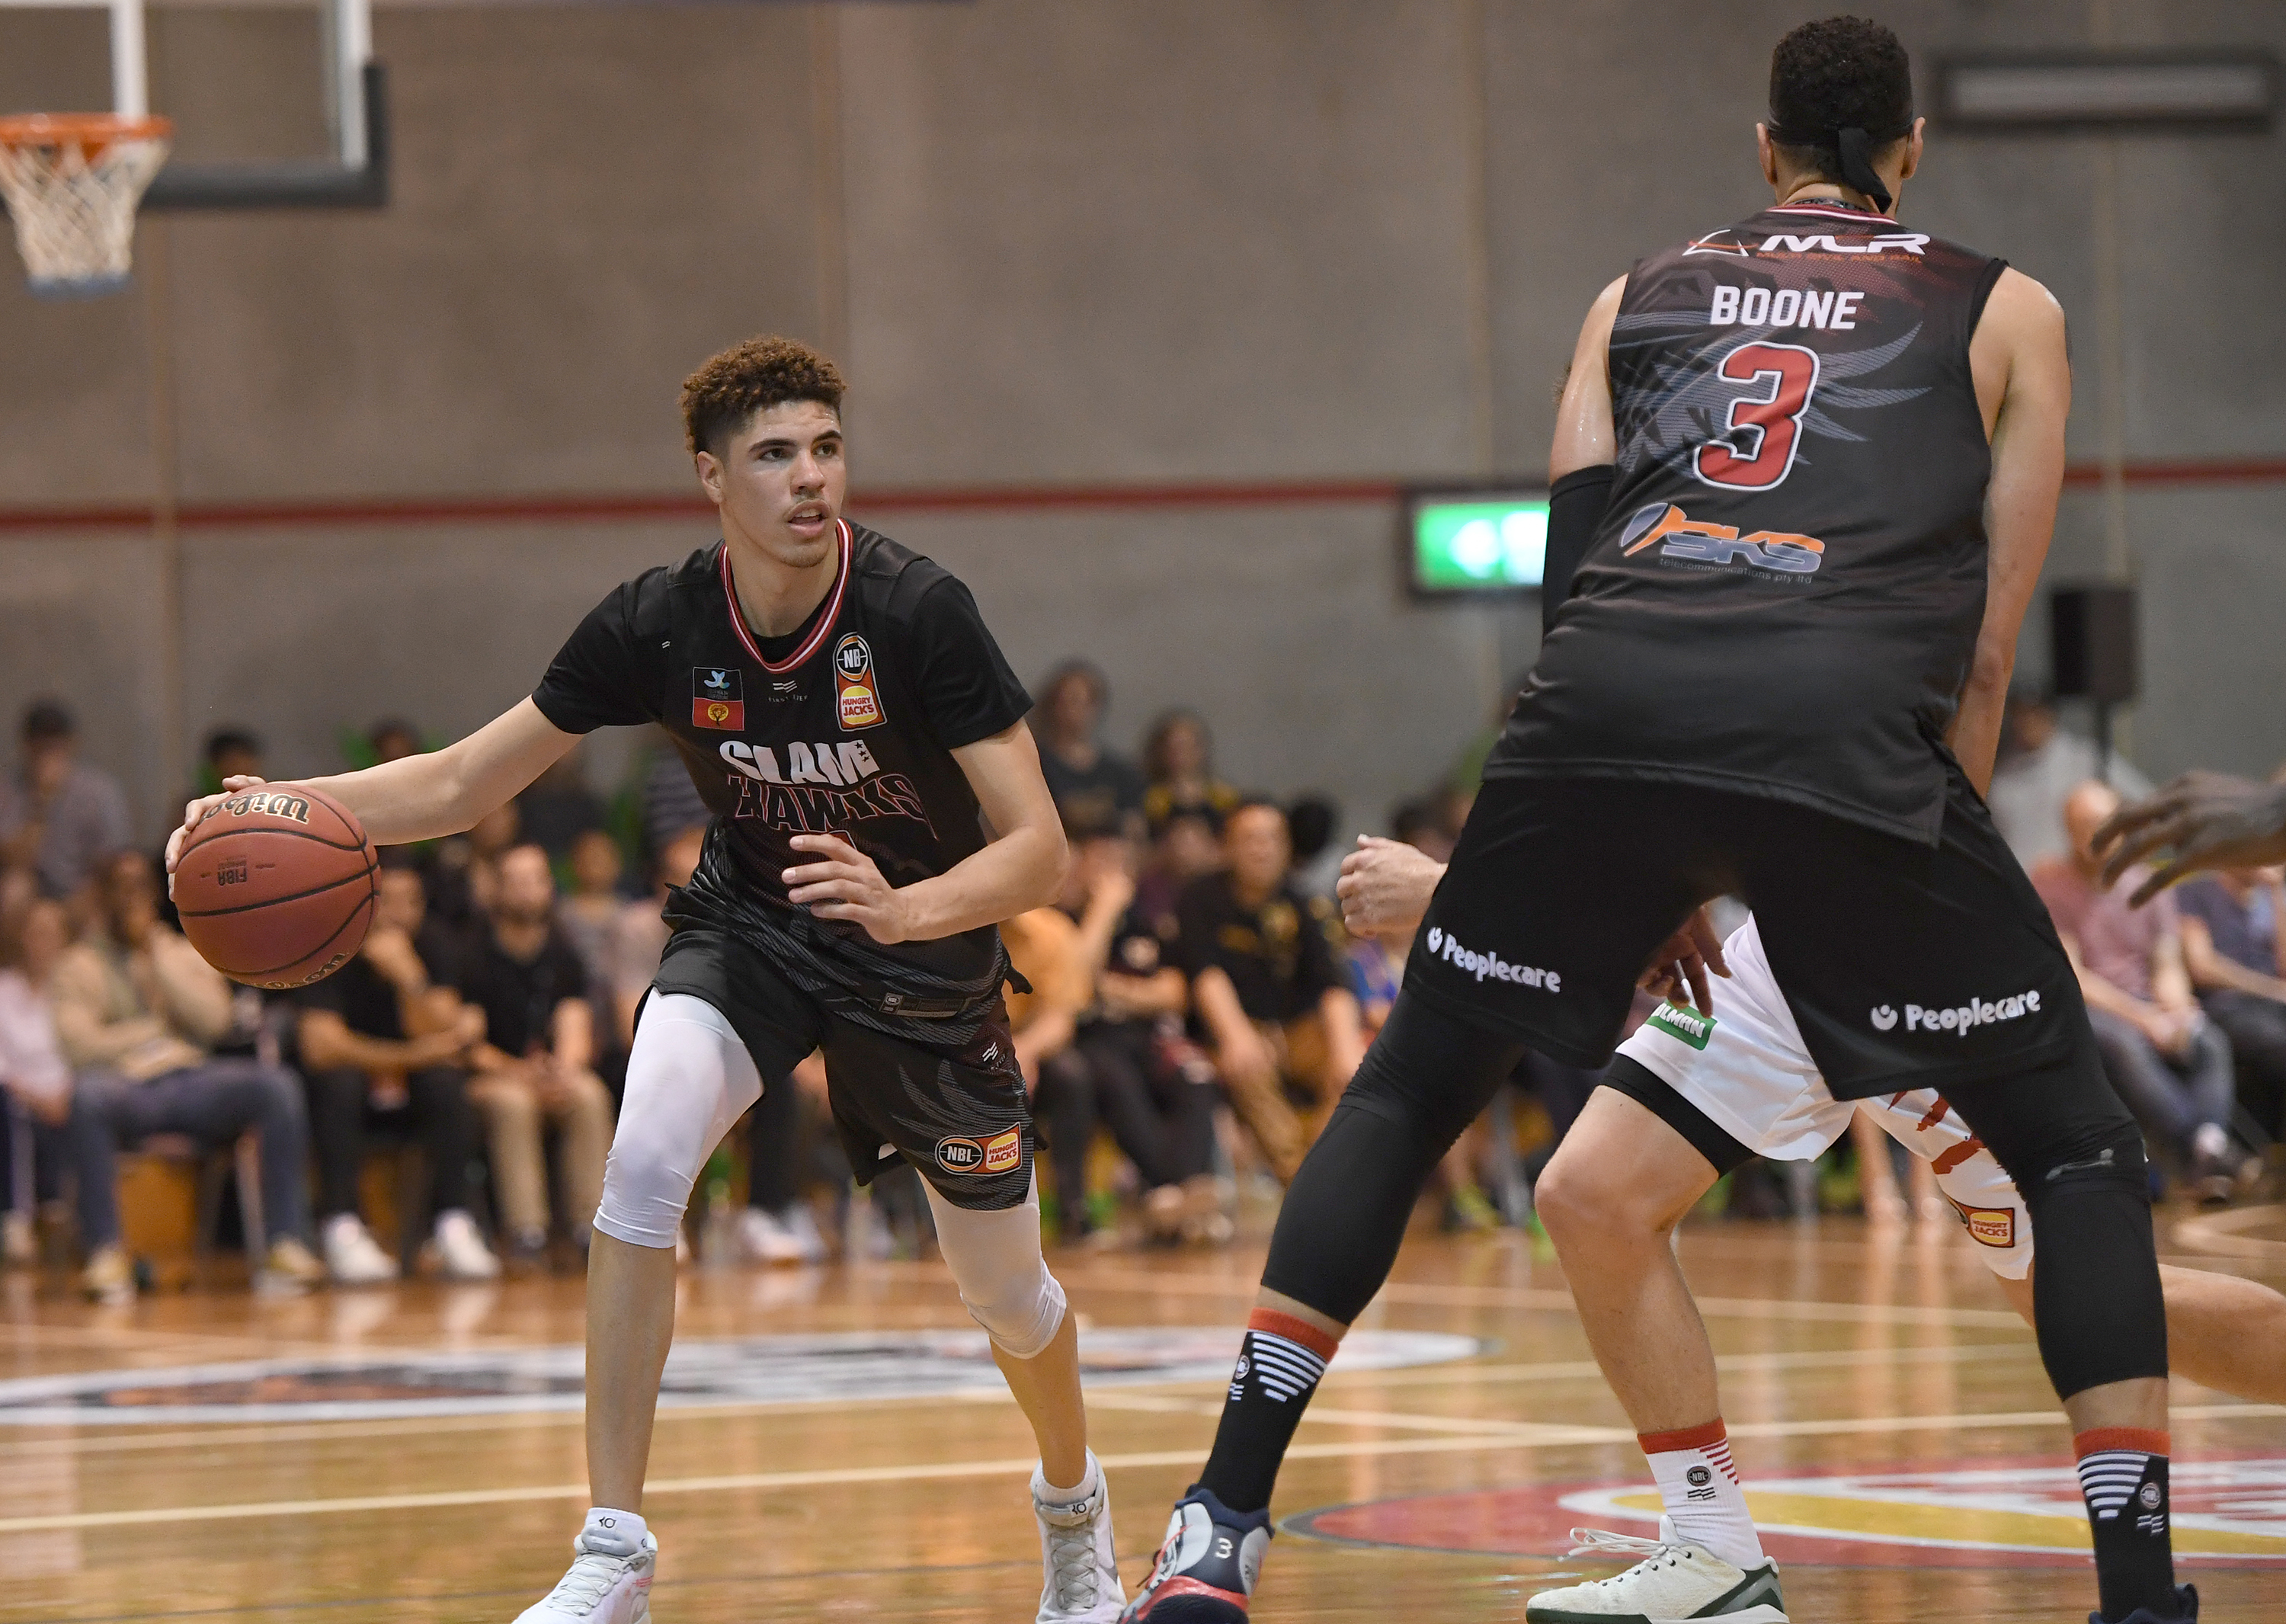 Nba Execs Reportedly Believe Lamelo Ball Could Get Picked 1 Overall In 2020 Nba Draft After Impressive Play In Australian Pro League Brobible